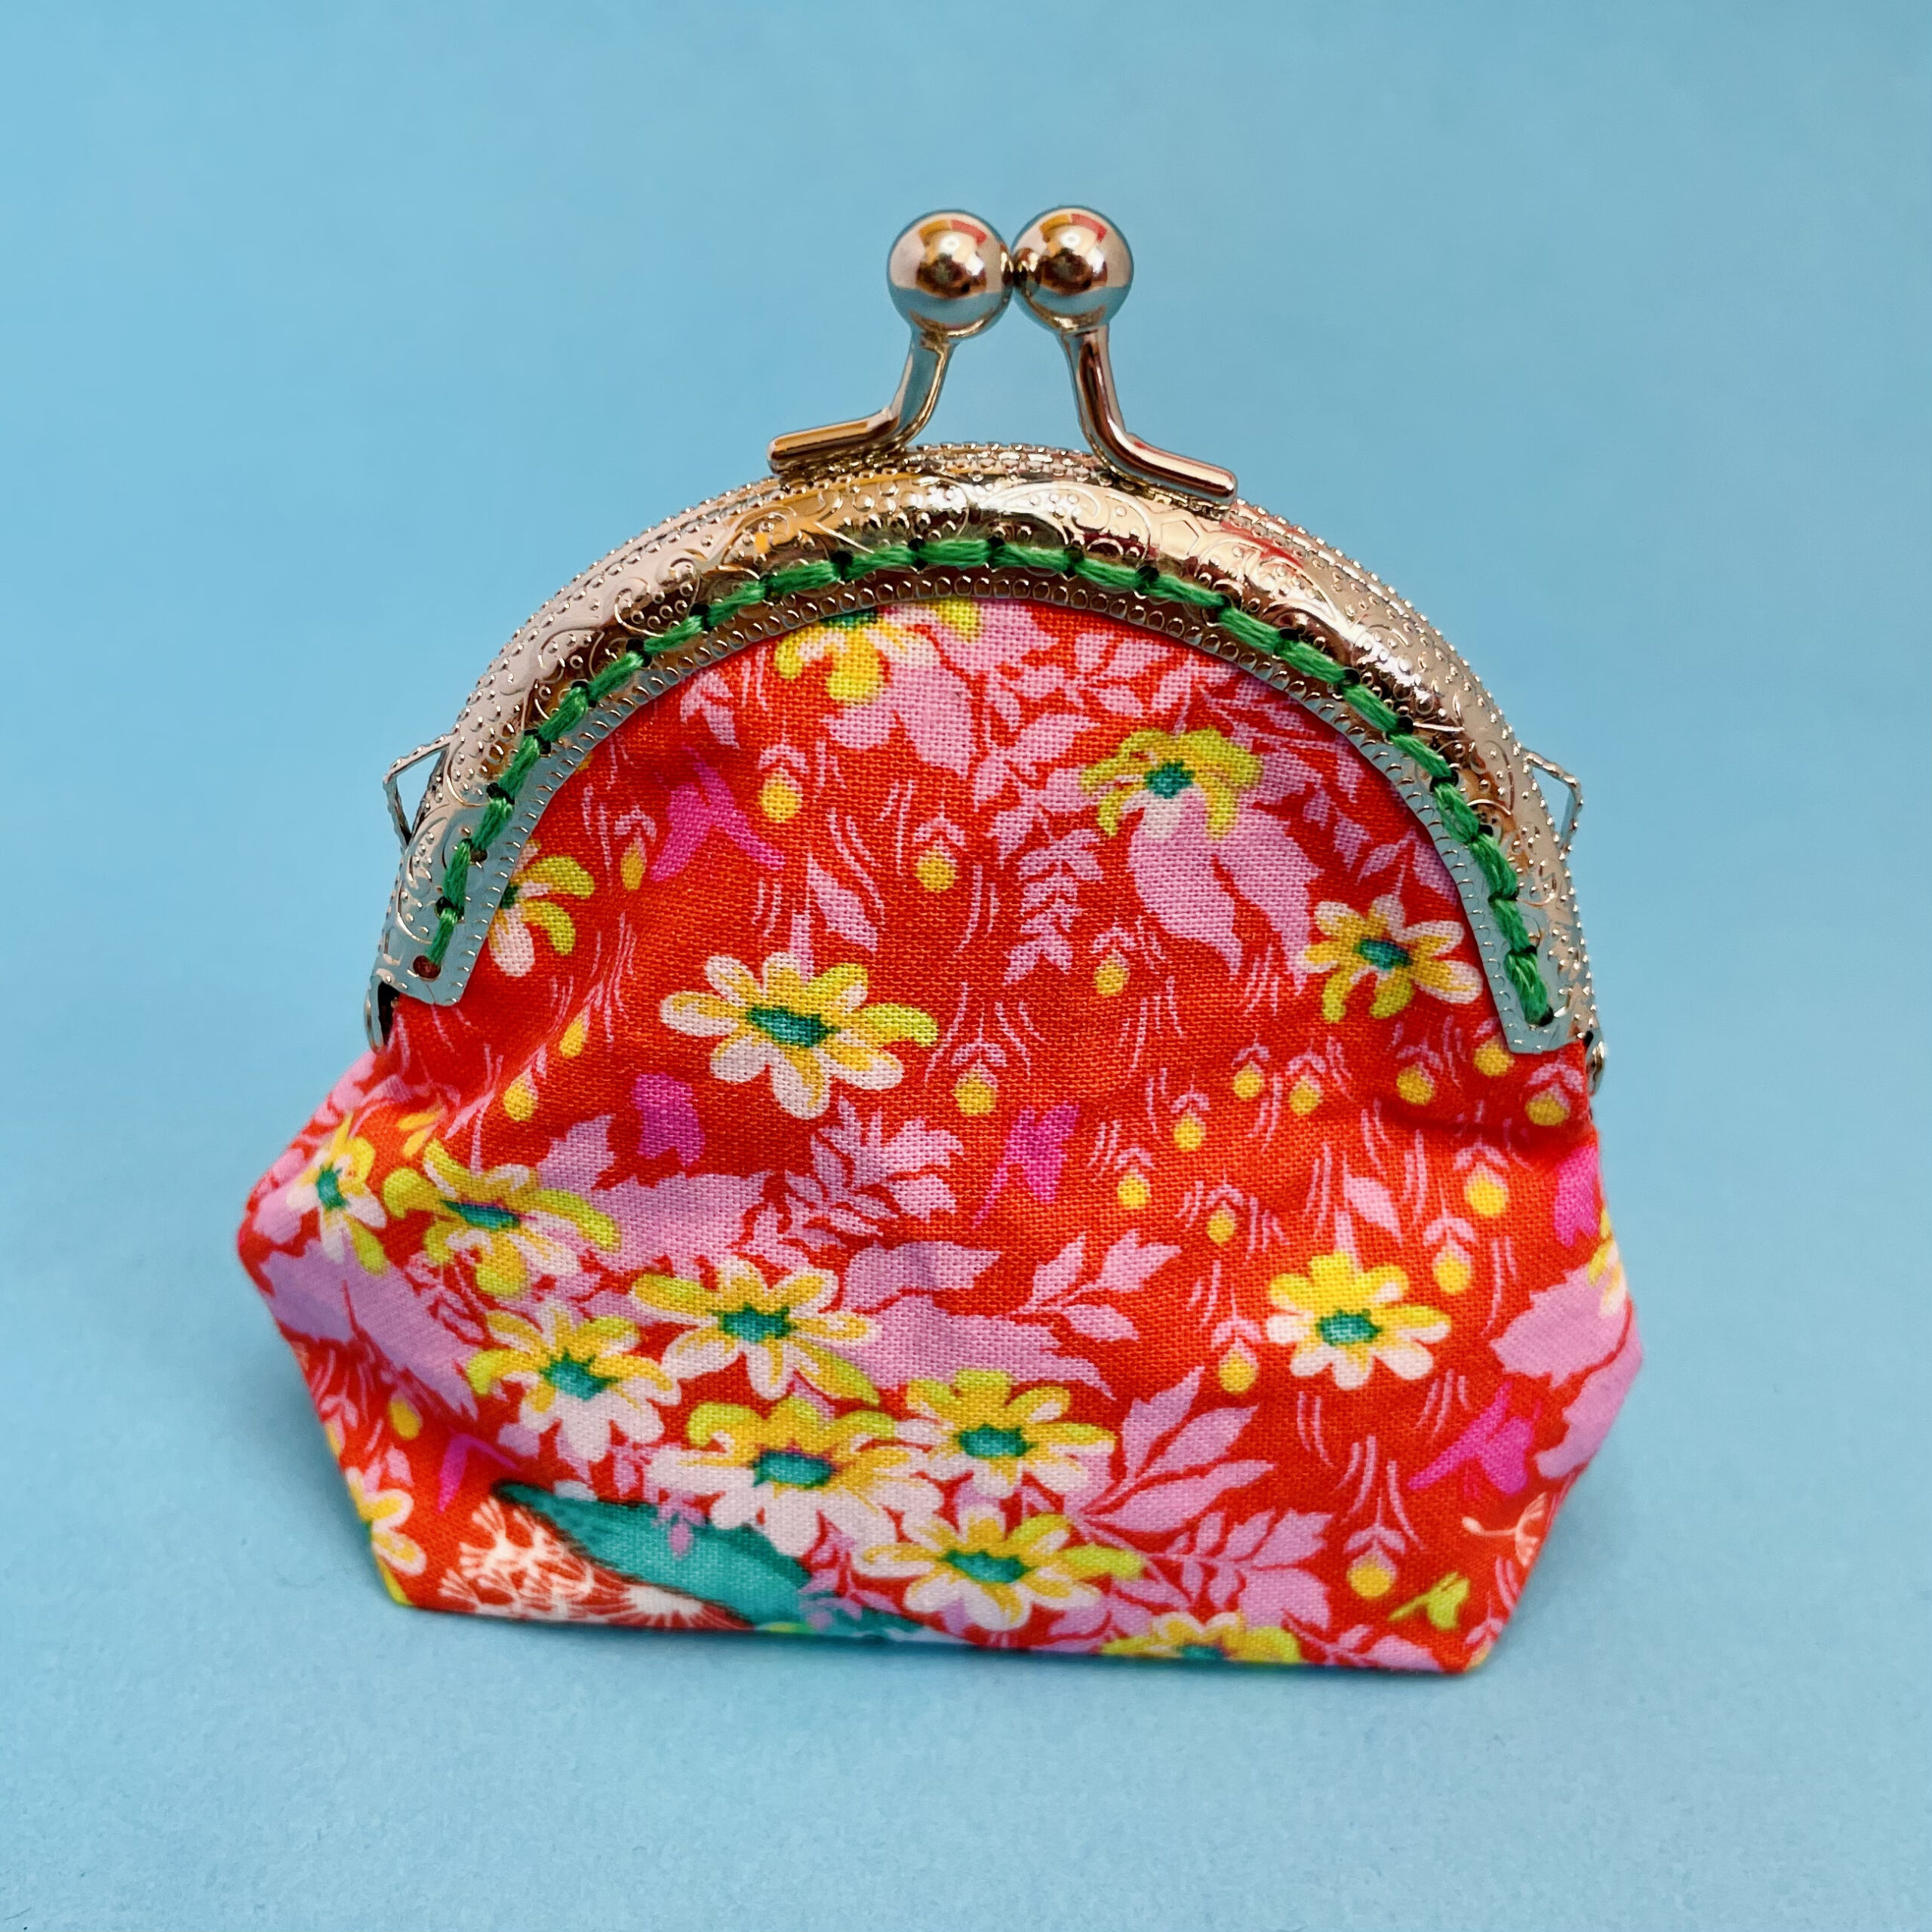 Coin purse with flower hedgehog. Orange, yellow, green.